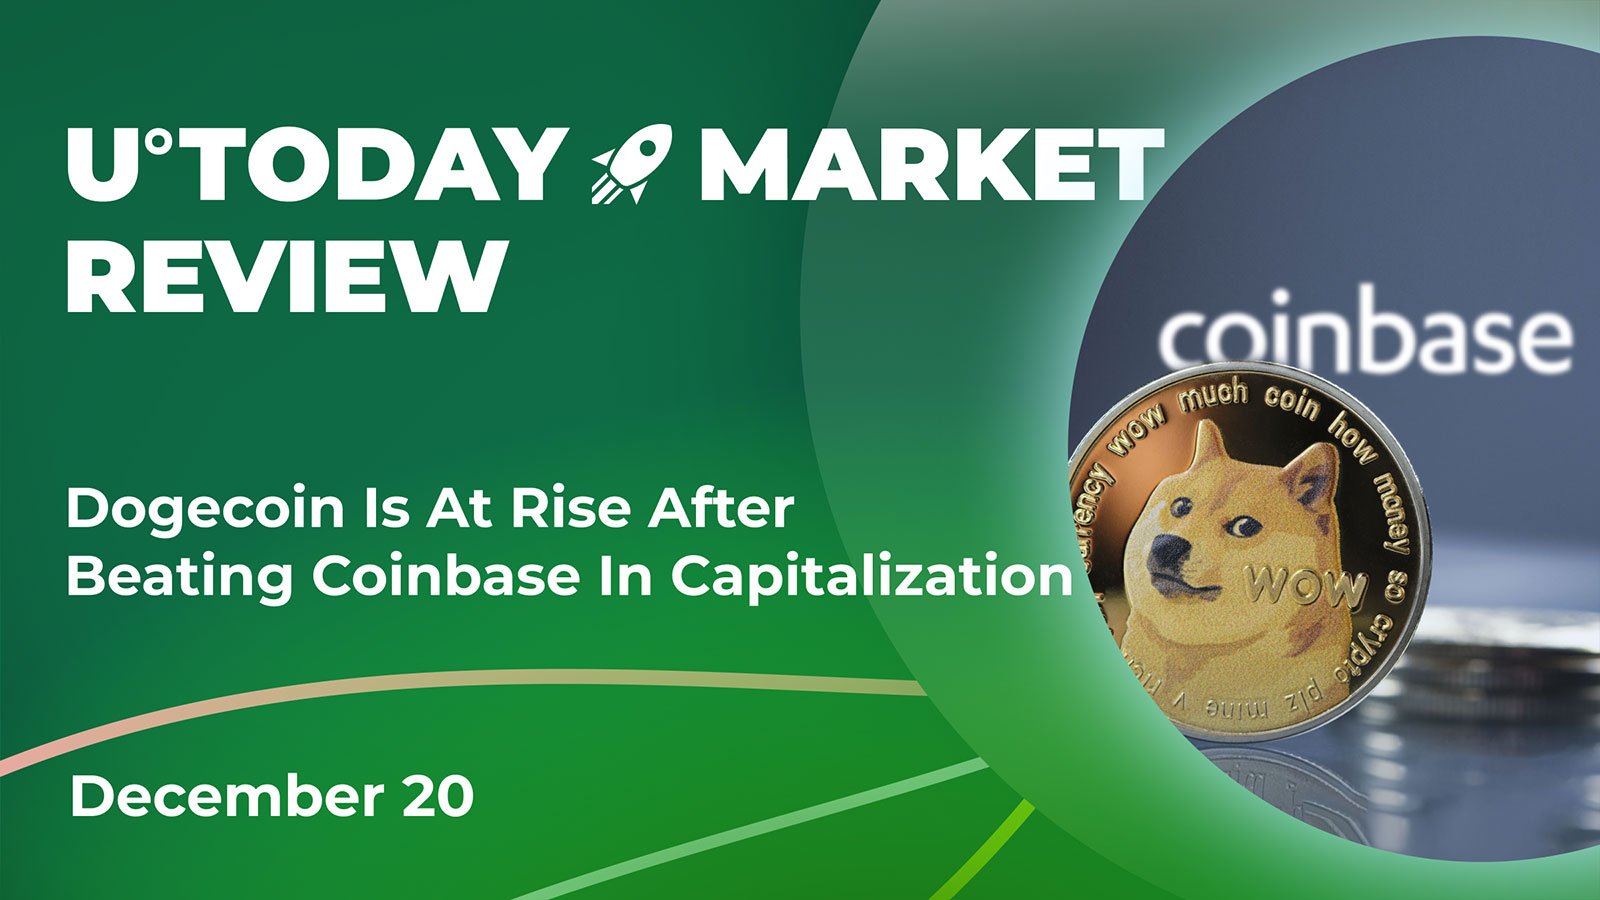 Dogecoin on Rise After Beating Coinbase in Capitalization: Crypto Market Review, Dec. 20